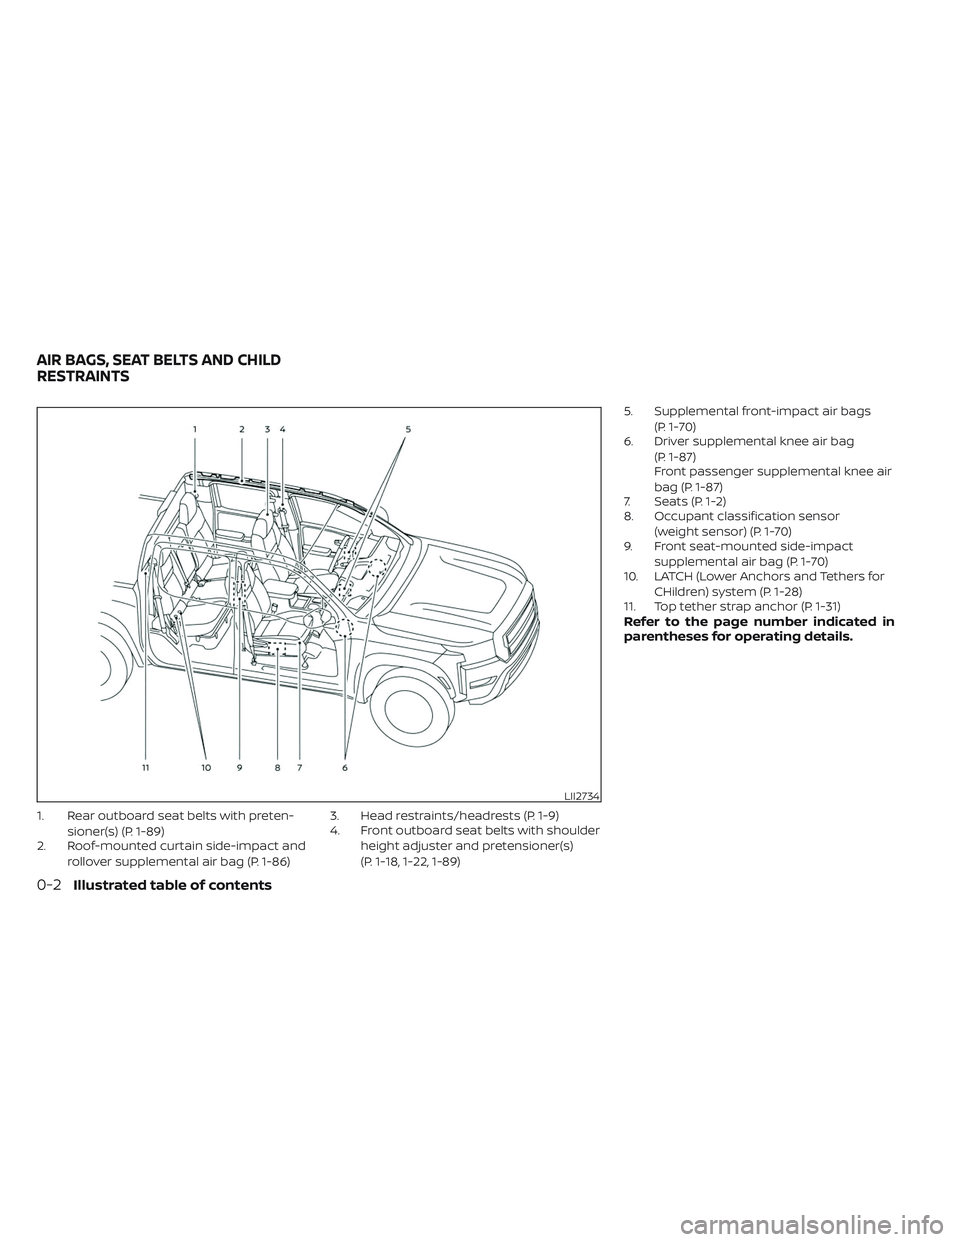 NISSAN FRONTIER 2023 User Guide 1. Rear outboard seat belts with preten-sioner(s) (P. 1-89)
2. Roof-mounted curtain side-impact and
rollover supplemental air bag (P. 1-86) 3. Head restraints/headrests (P. 1-9)
4. Front outboard seat